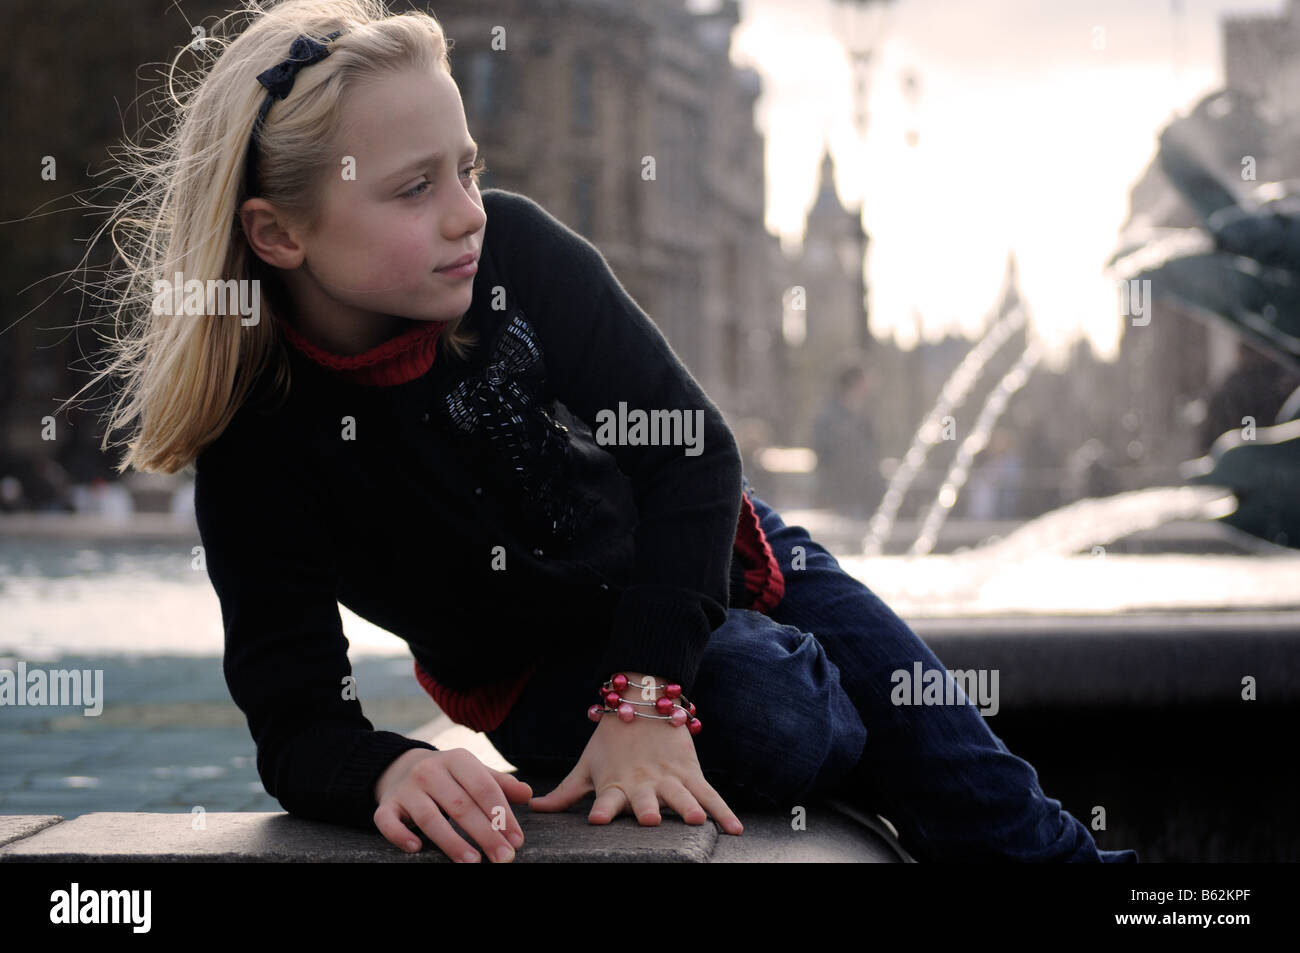 Royalty free photograph of young girl posing for photograph as a tourist in Trafalgar Square London UK Stock Photo